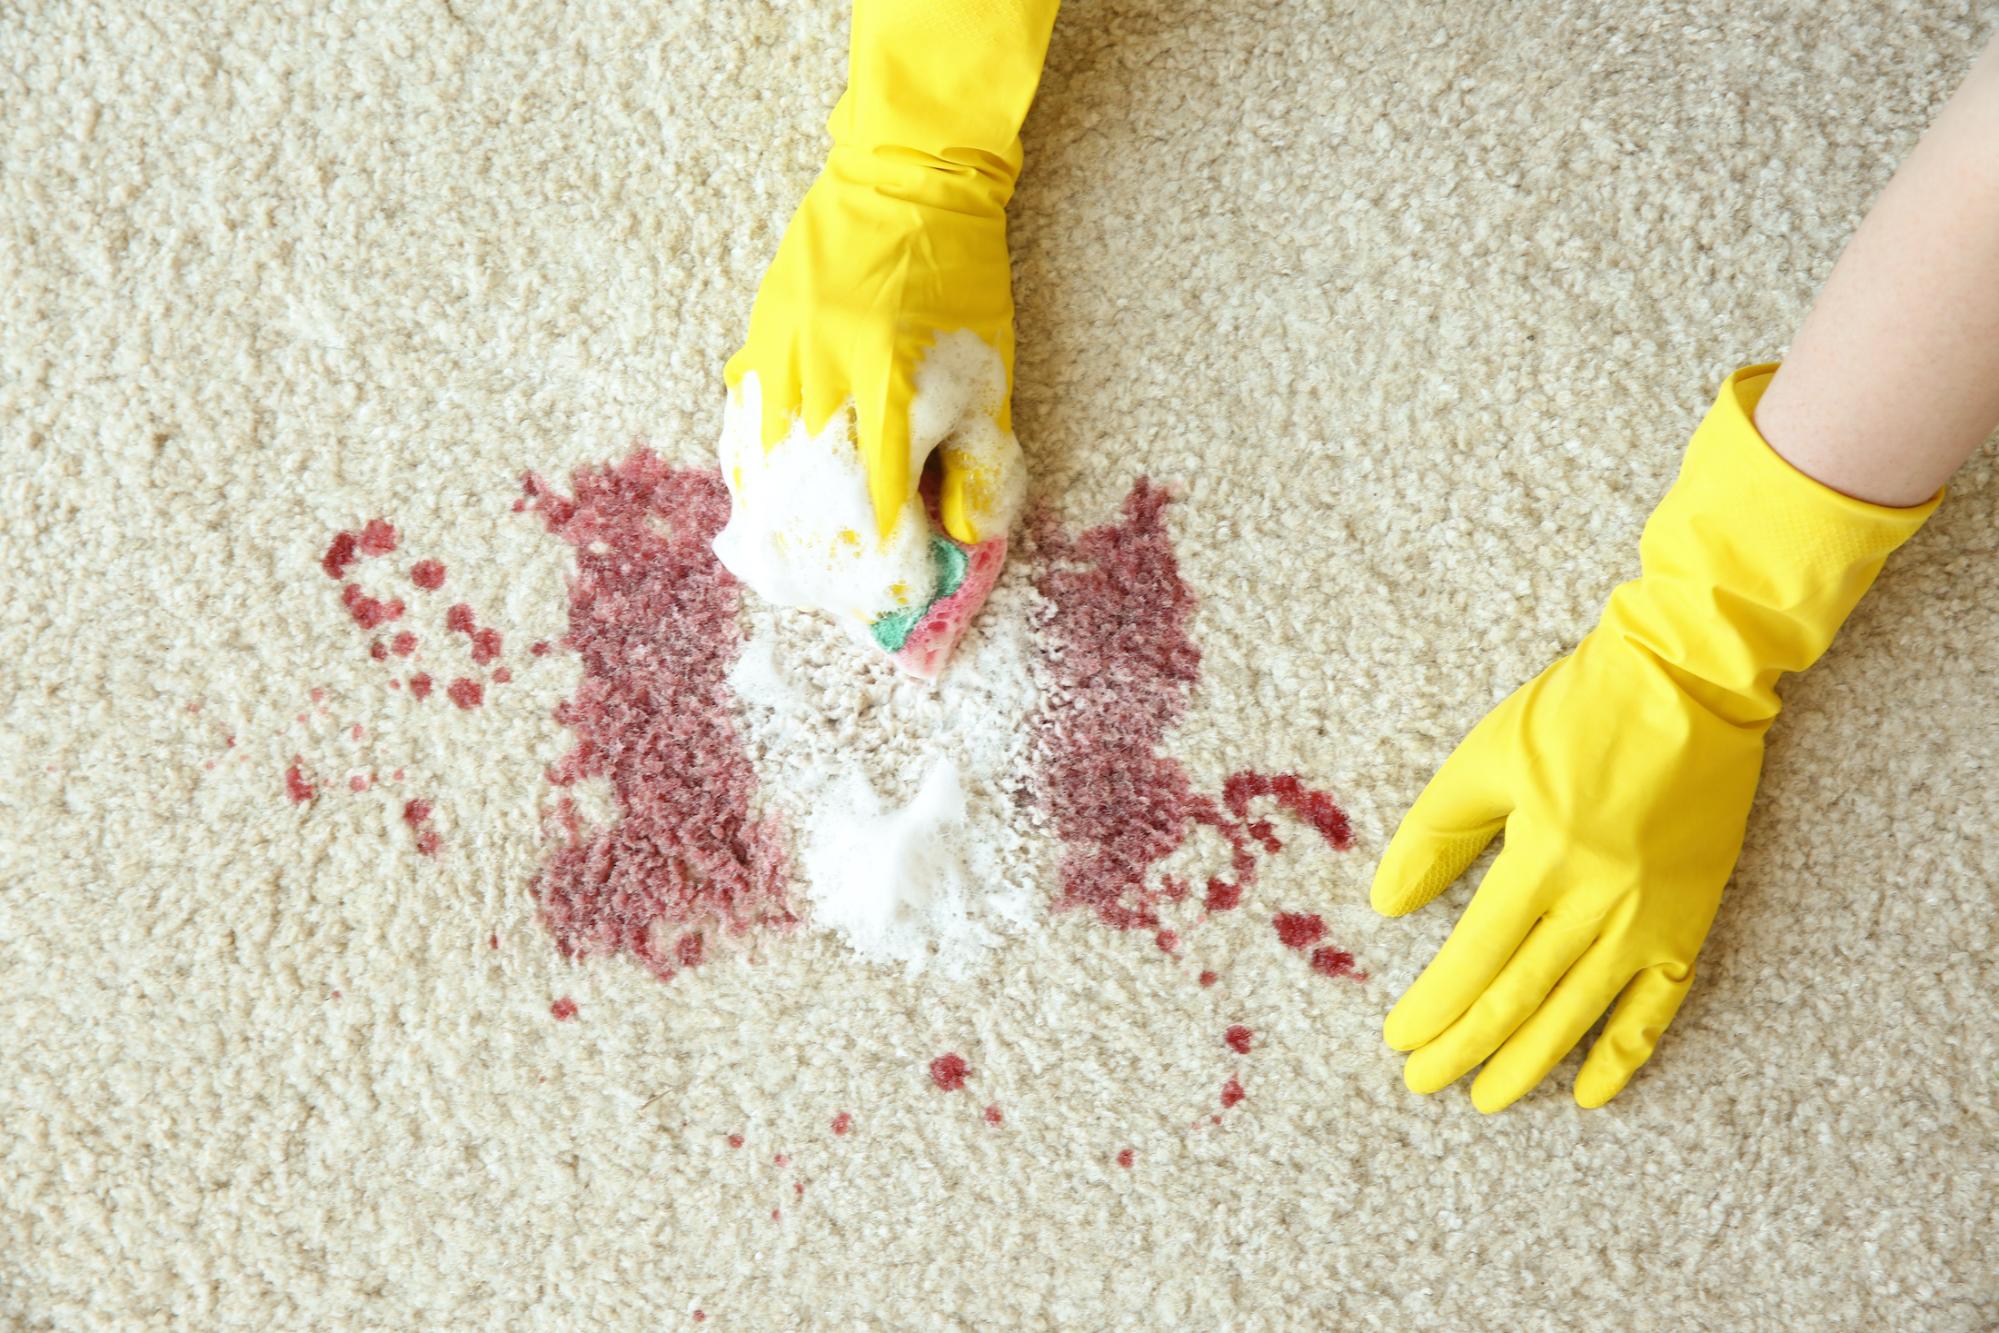 light carpet with large red wine stain. Hands wearing yellow rubber gloves scrubbing with soap and sponge 